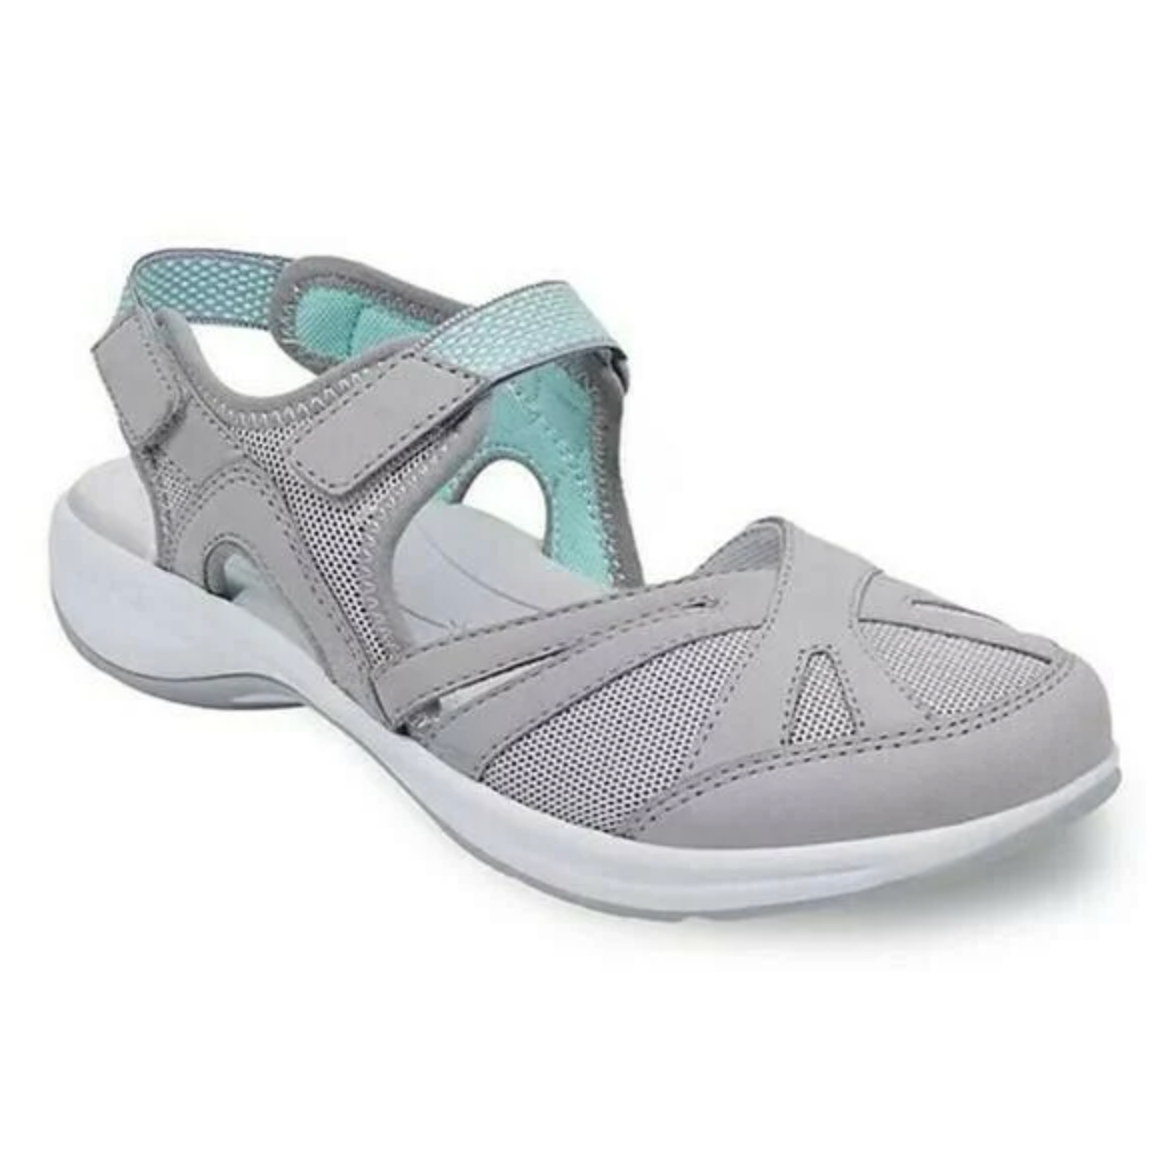 Lucie® Orthopedic Sandals - Chic and comfortable